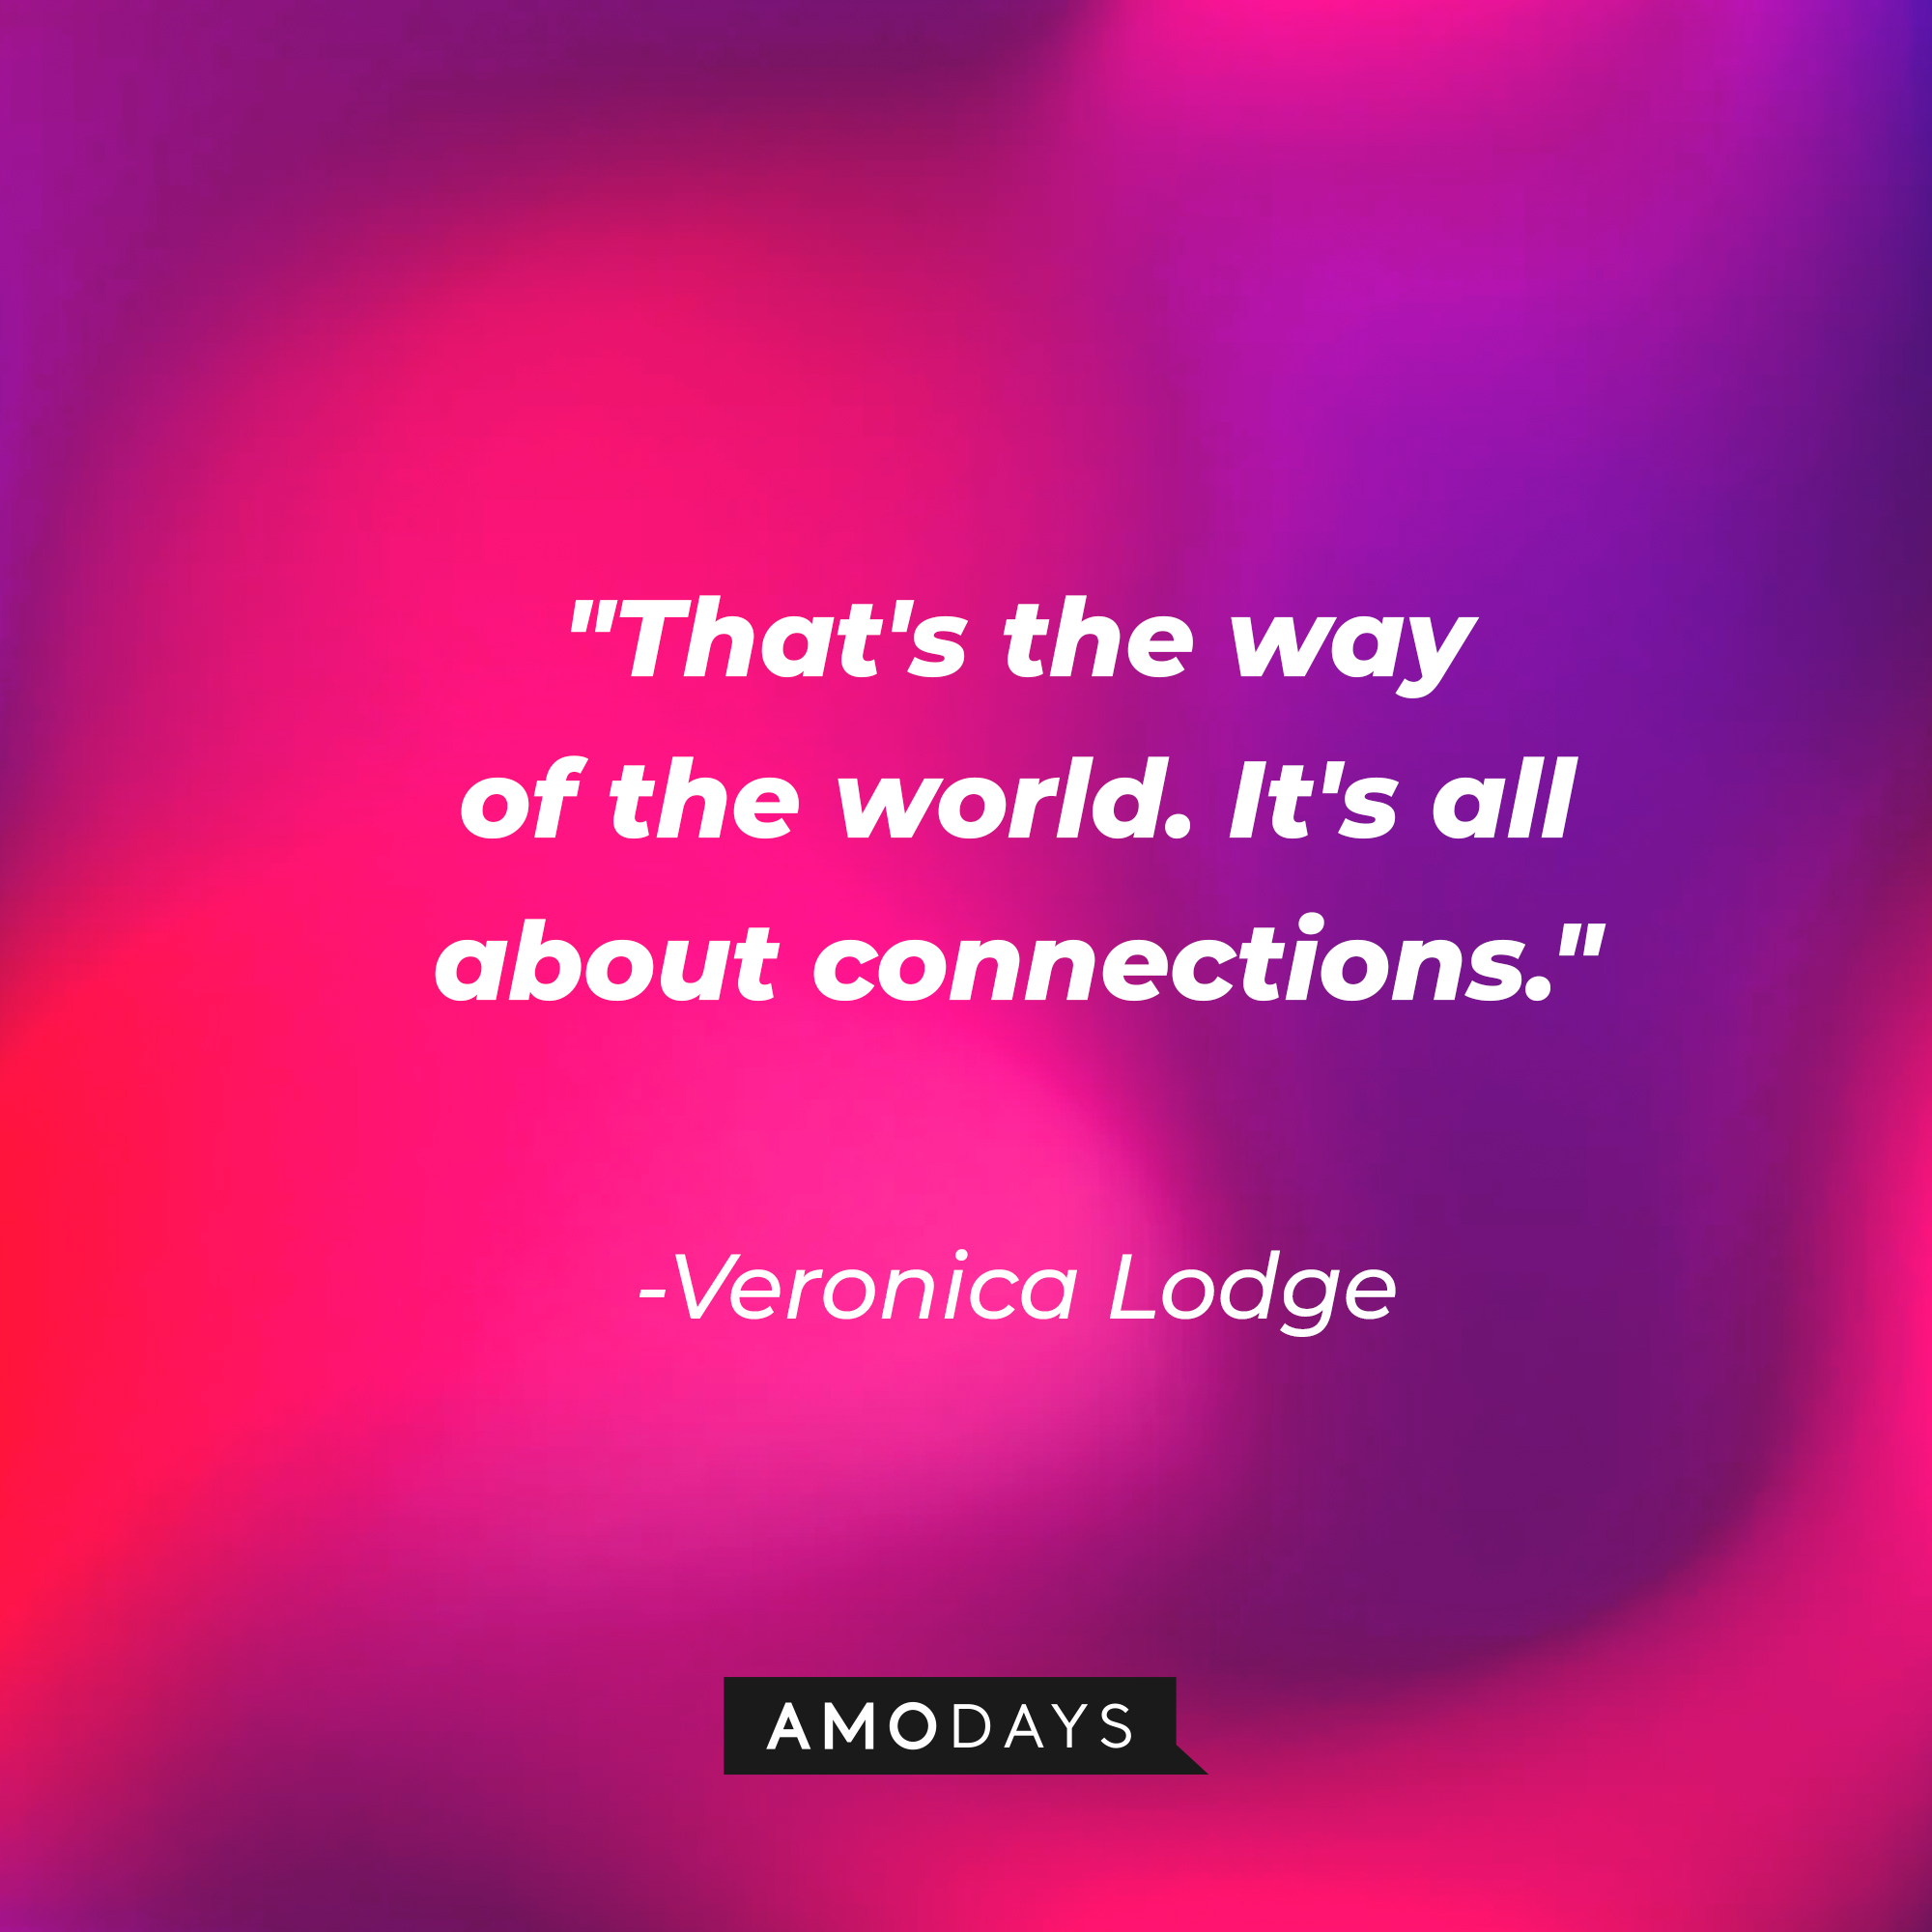 Veronica Lodge's quote: "That's the way of the world. It's all about connections." | Source: AmoDays